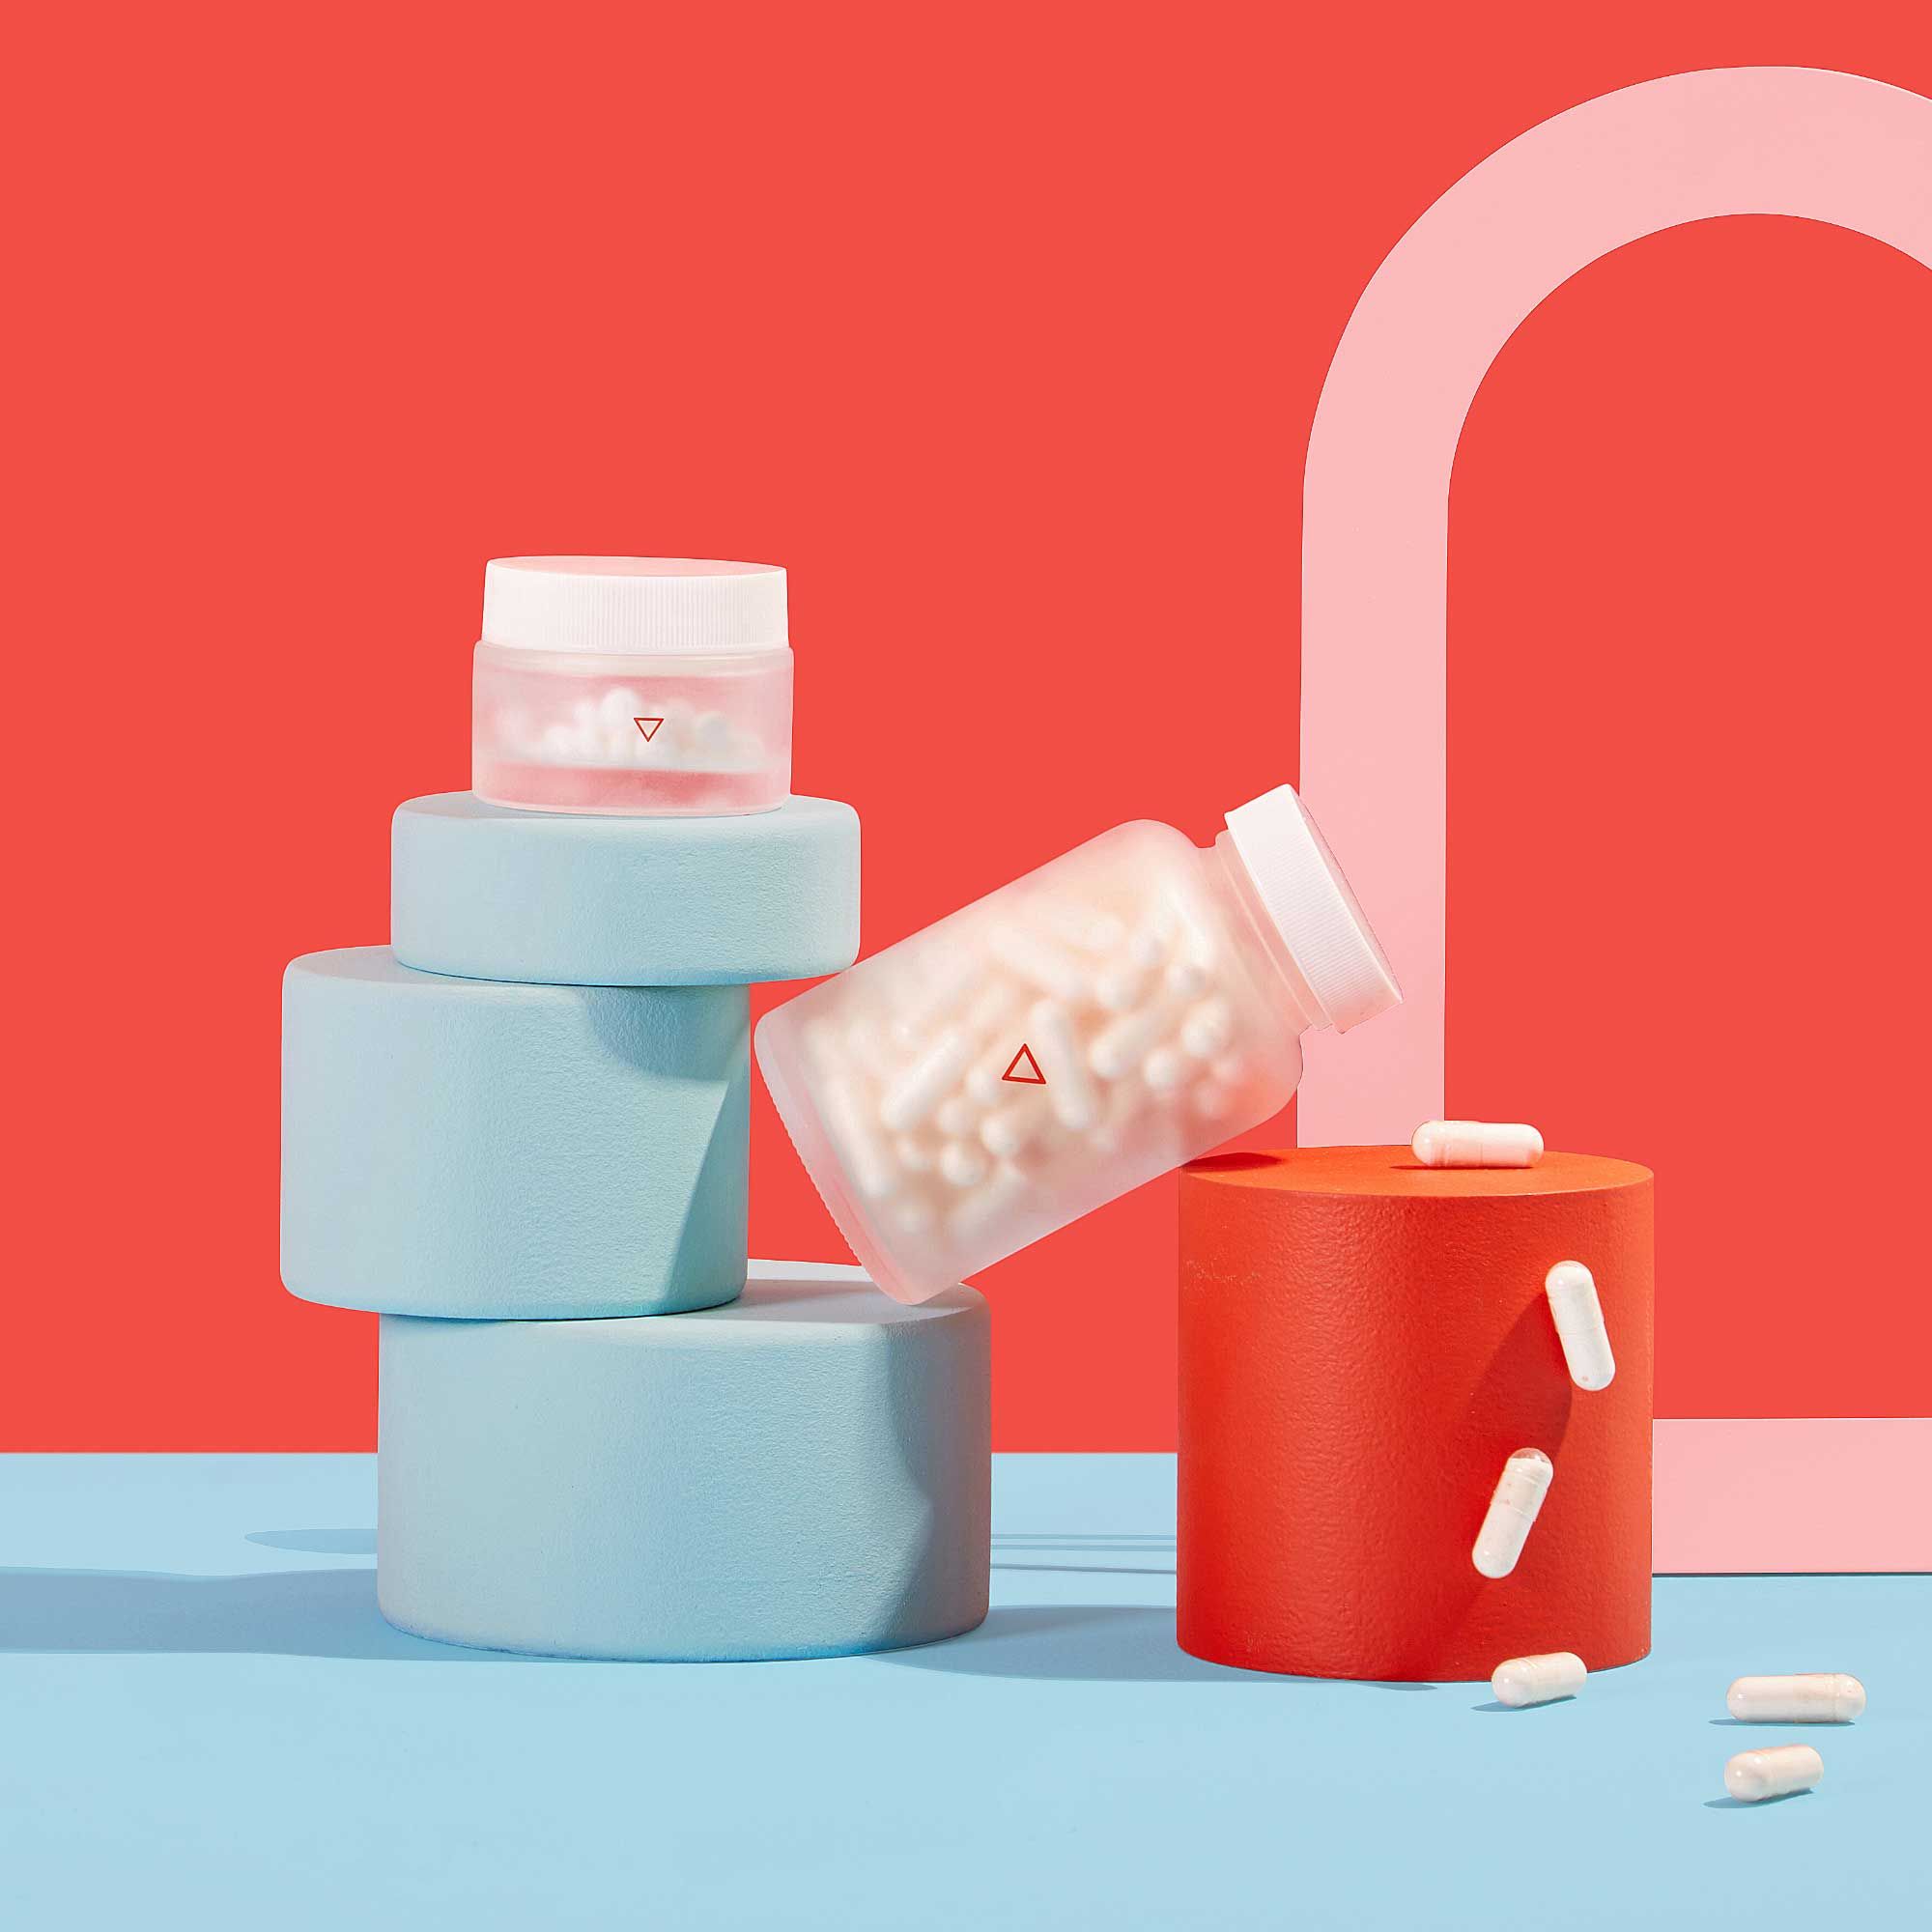 A small and large Wisp glass pill jar balanced on colorful abstract shapes with pills spilling out on a blue surface with a red background